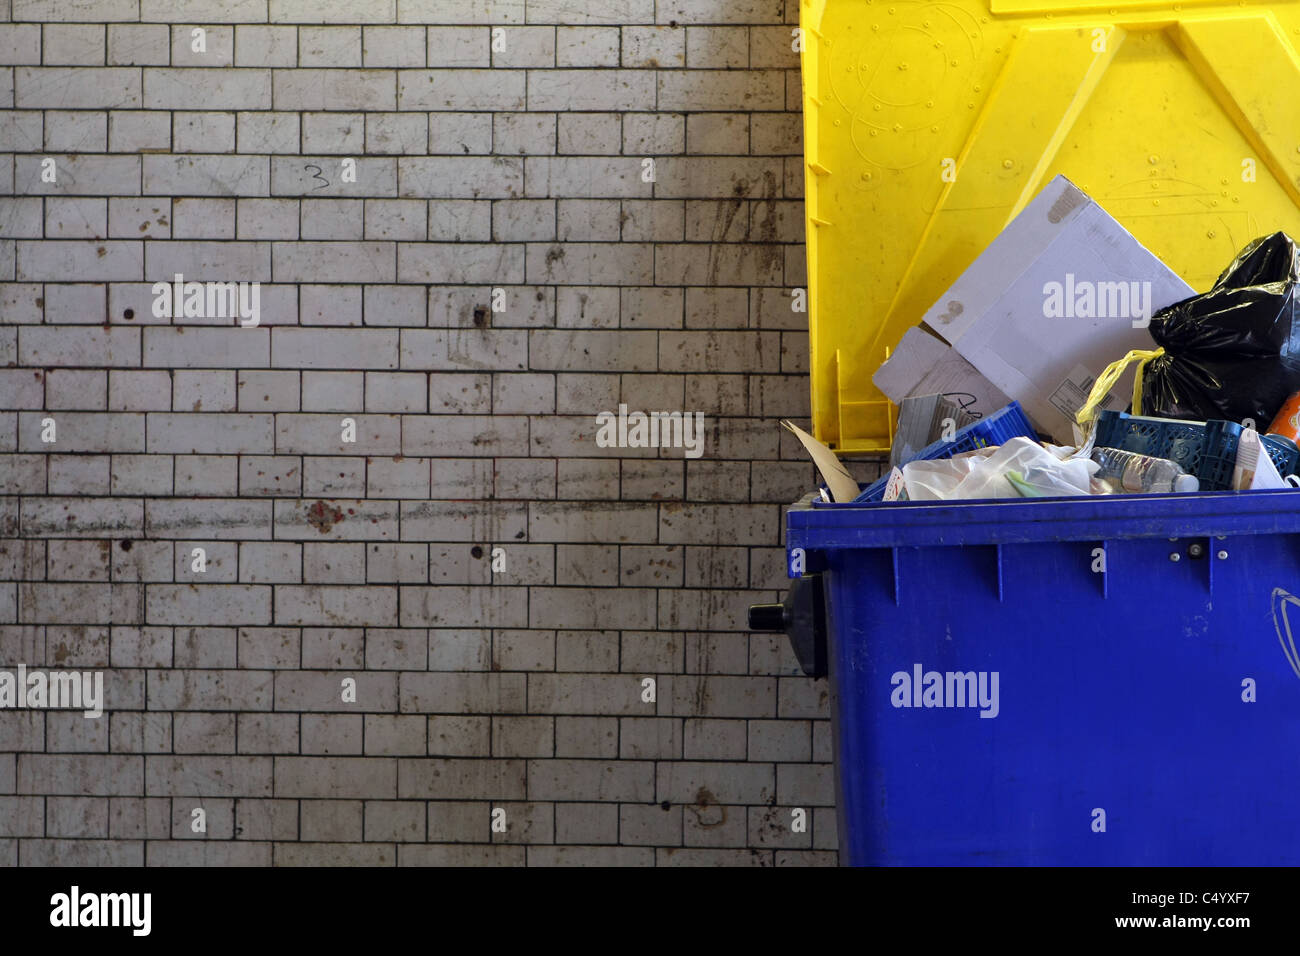 Part of a commercial wheelie bin full of rubbish under a railway arch in London Stock Photo